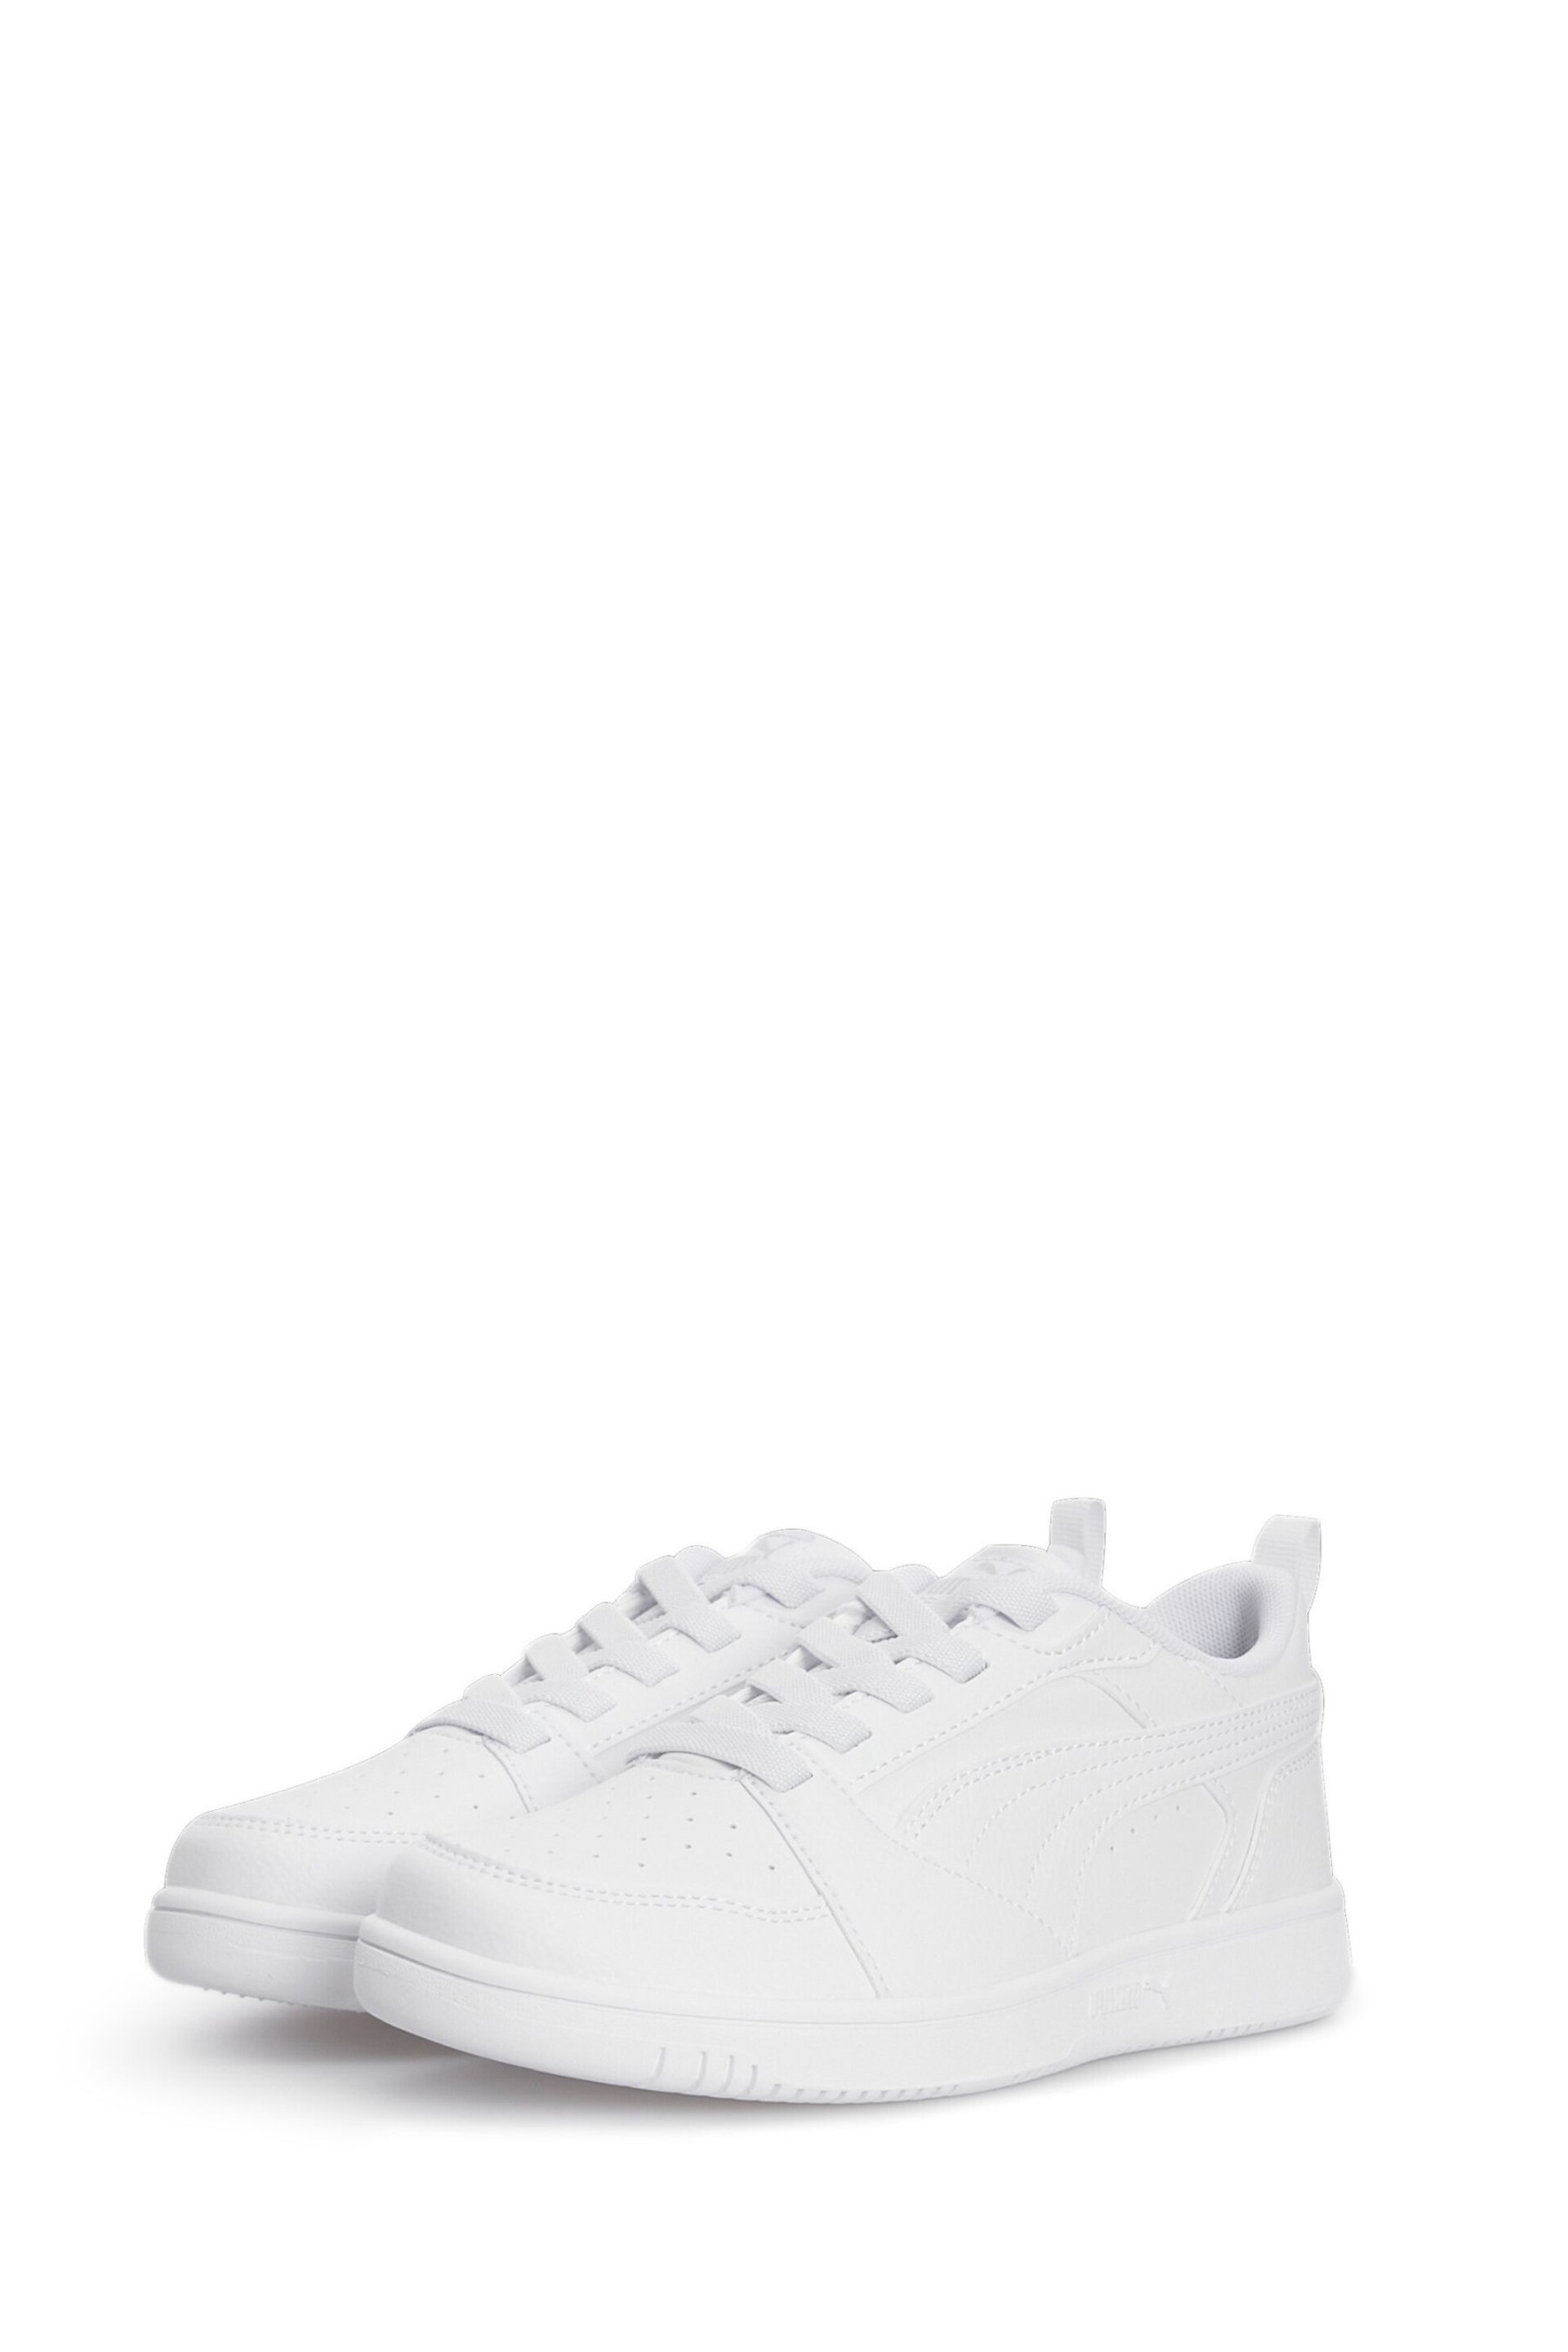 Puma White Unisex Kids Rebound V6 LO Sneakers Trainers - Image 3 of 6